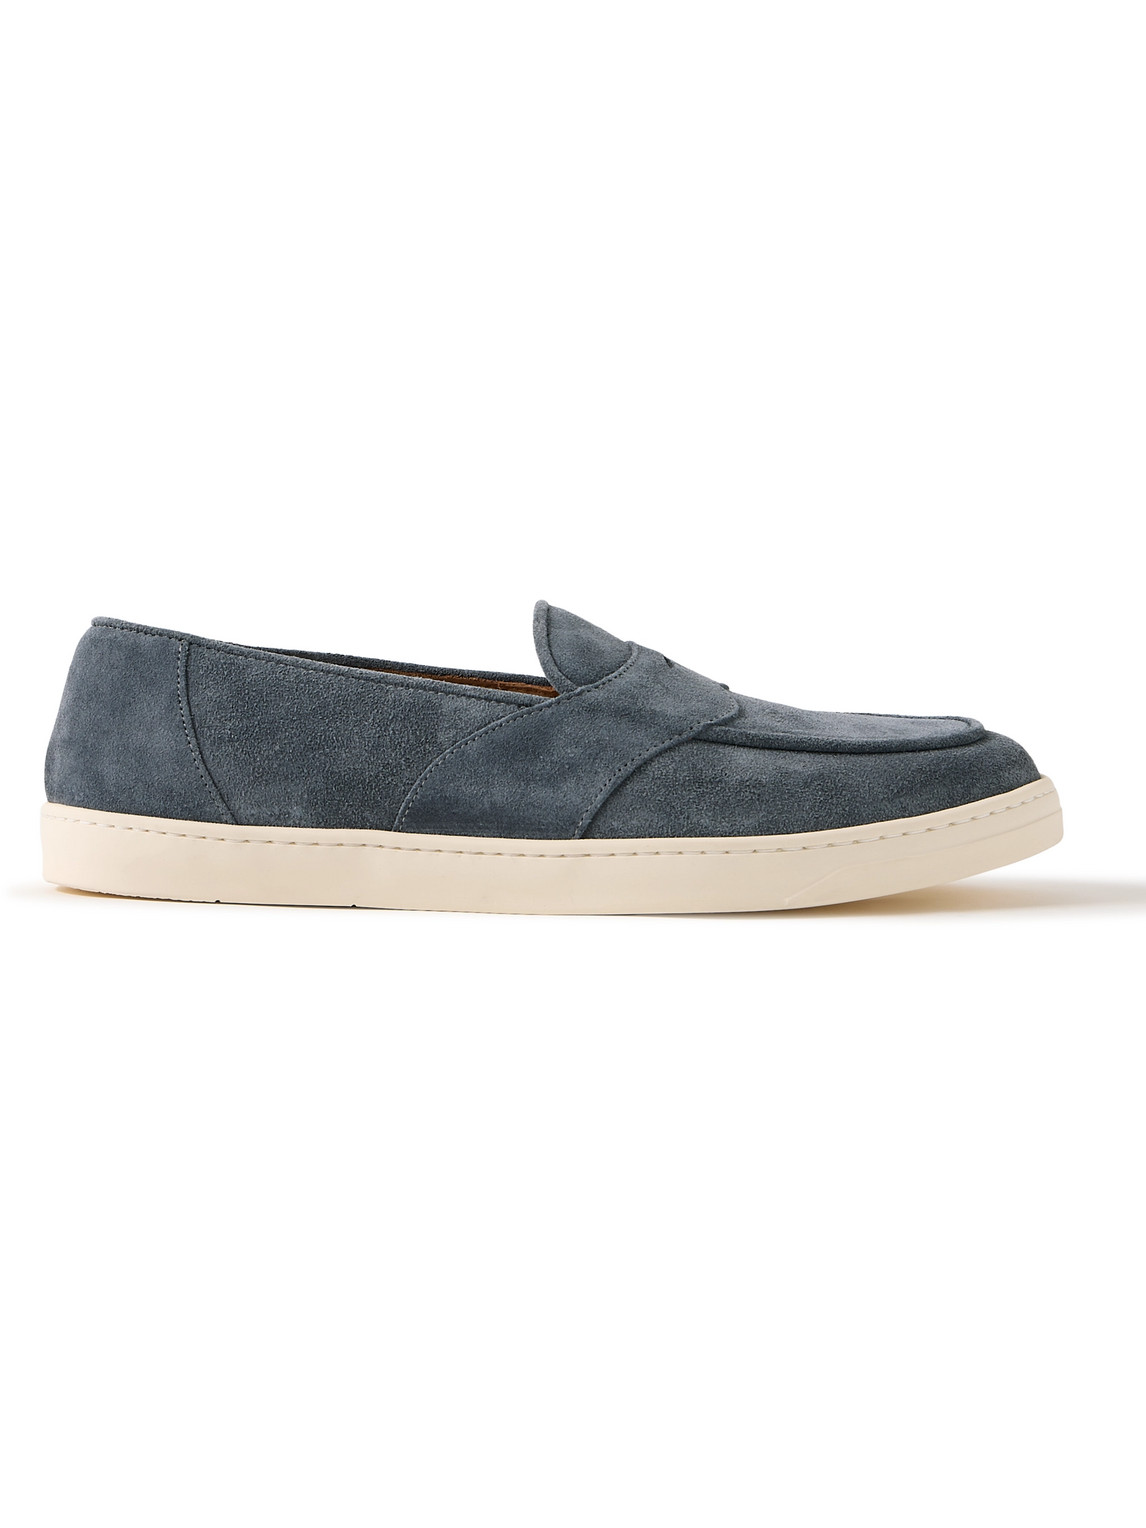 Joey Suede Penny Loafers